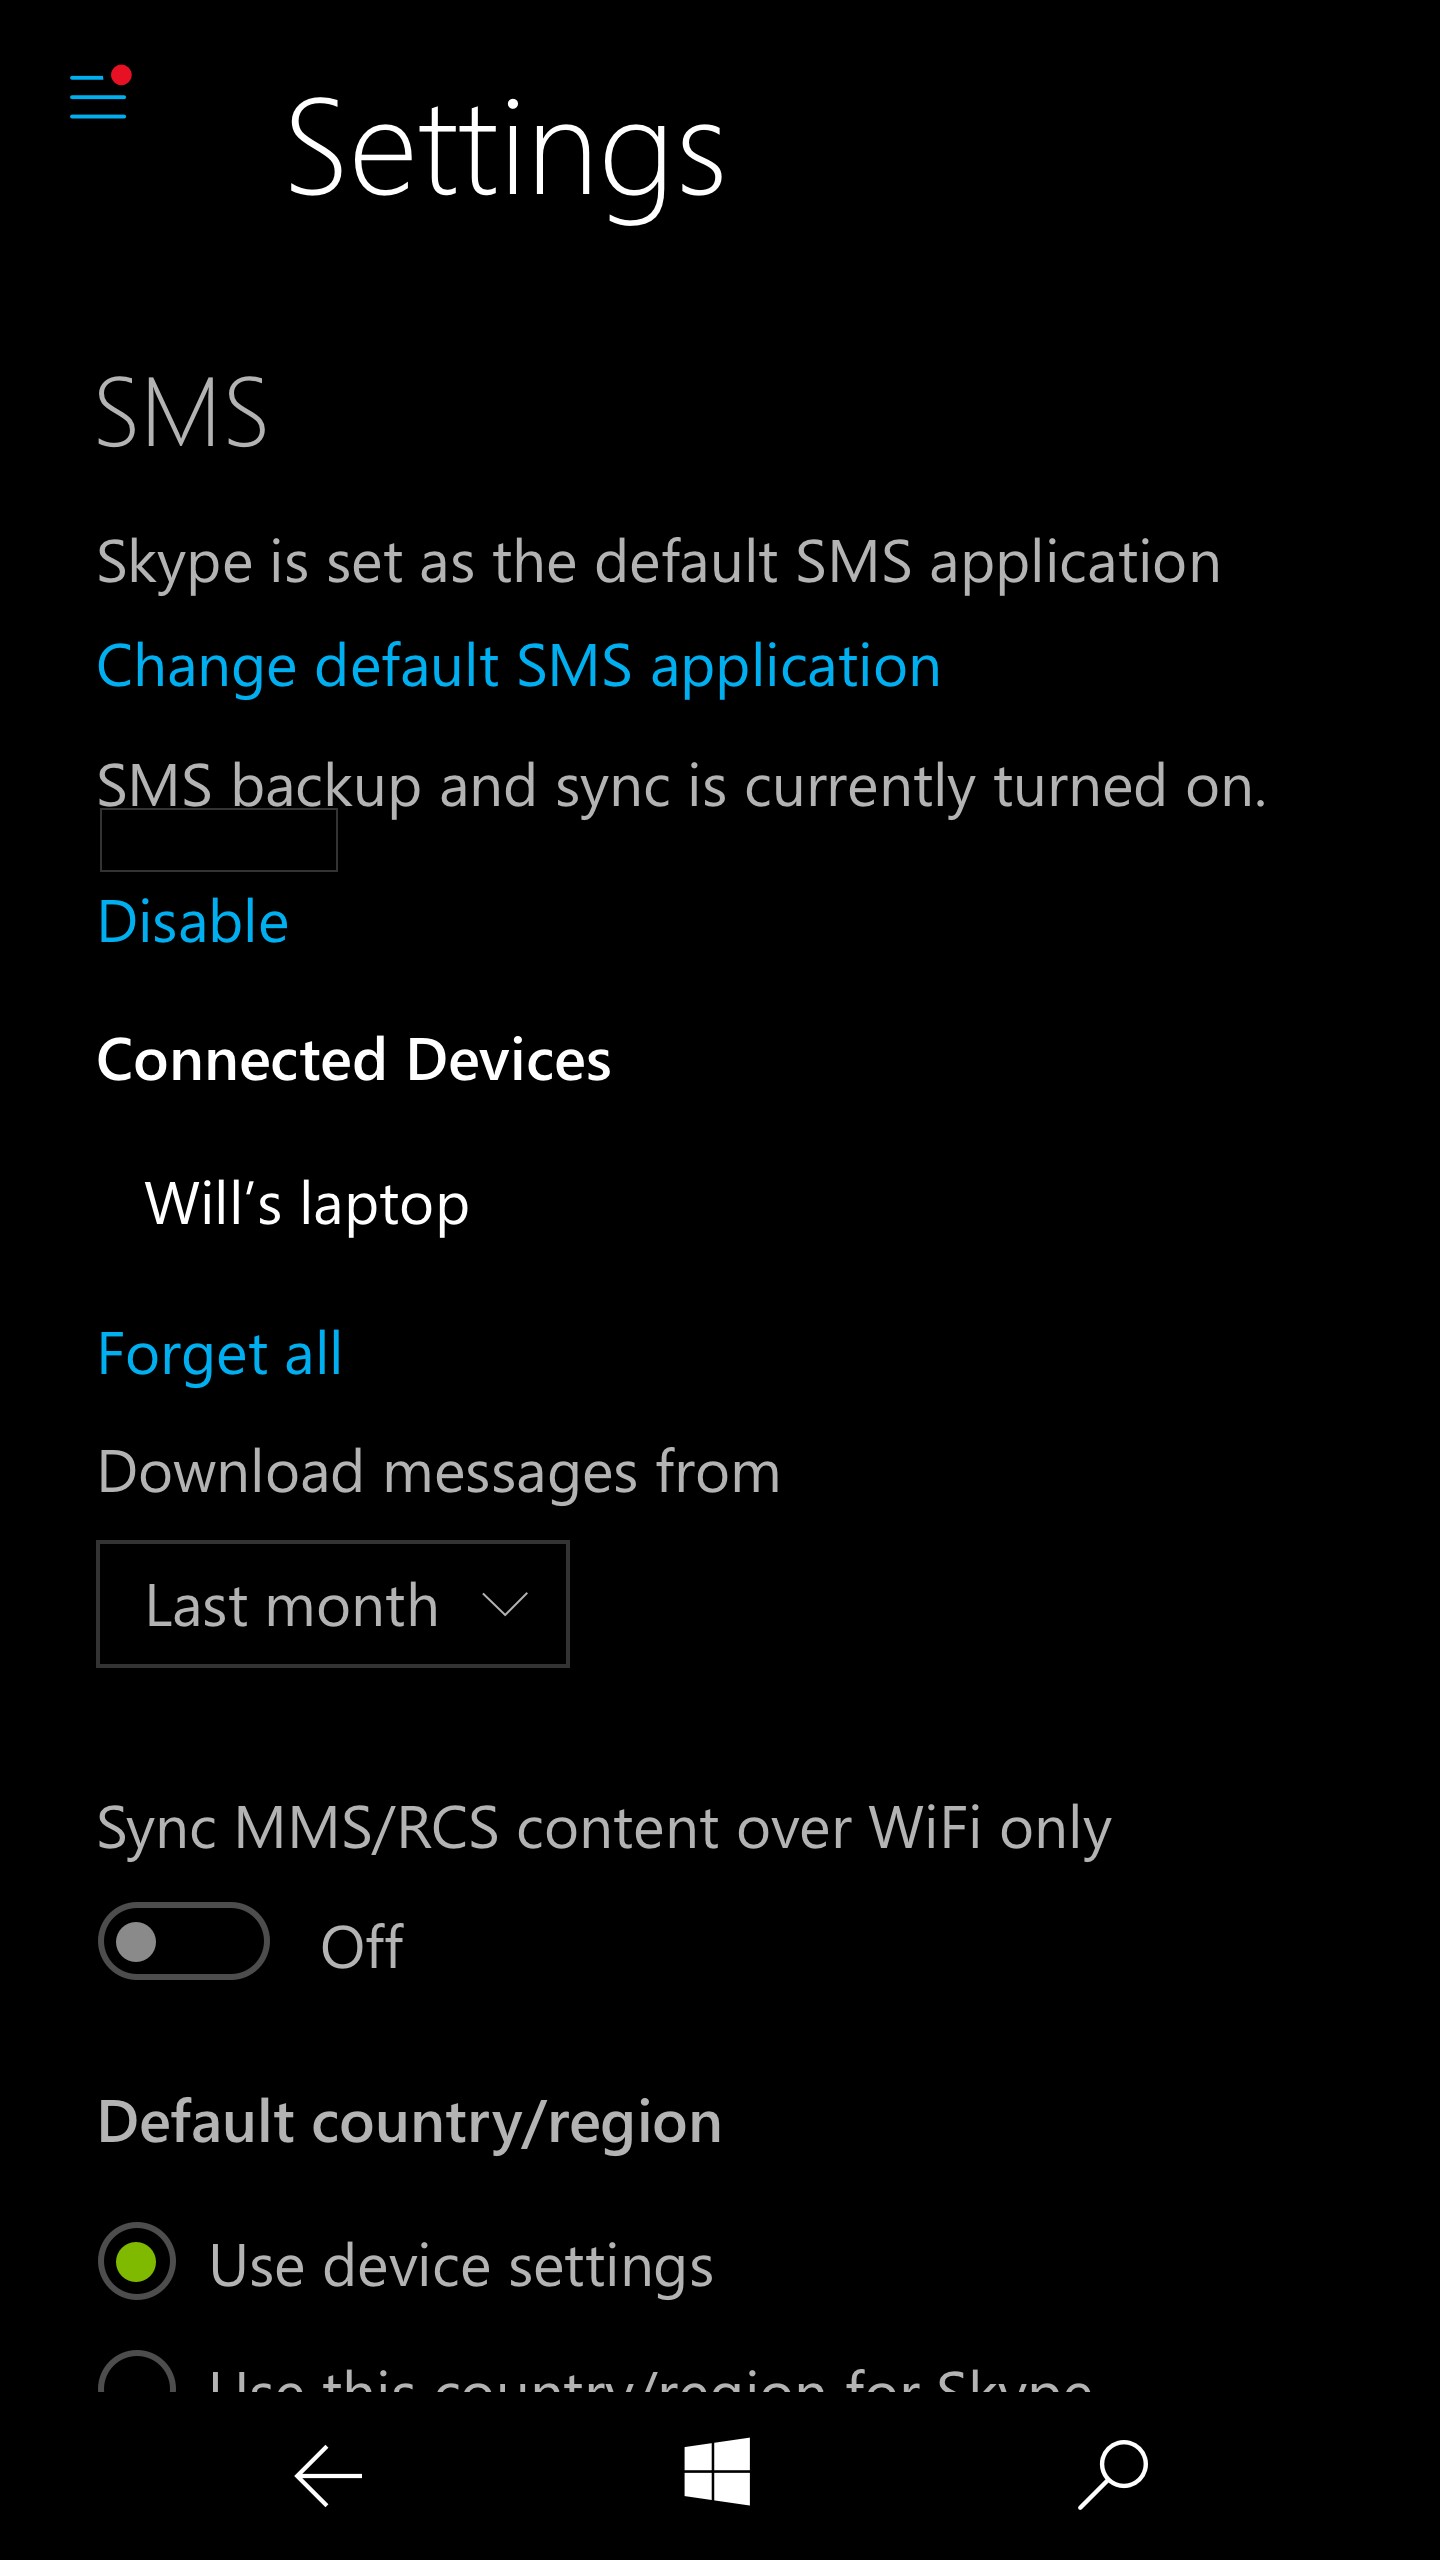 How to send SMS messages using Skype on Windows 10 devices